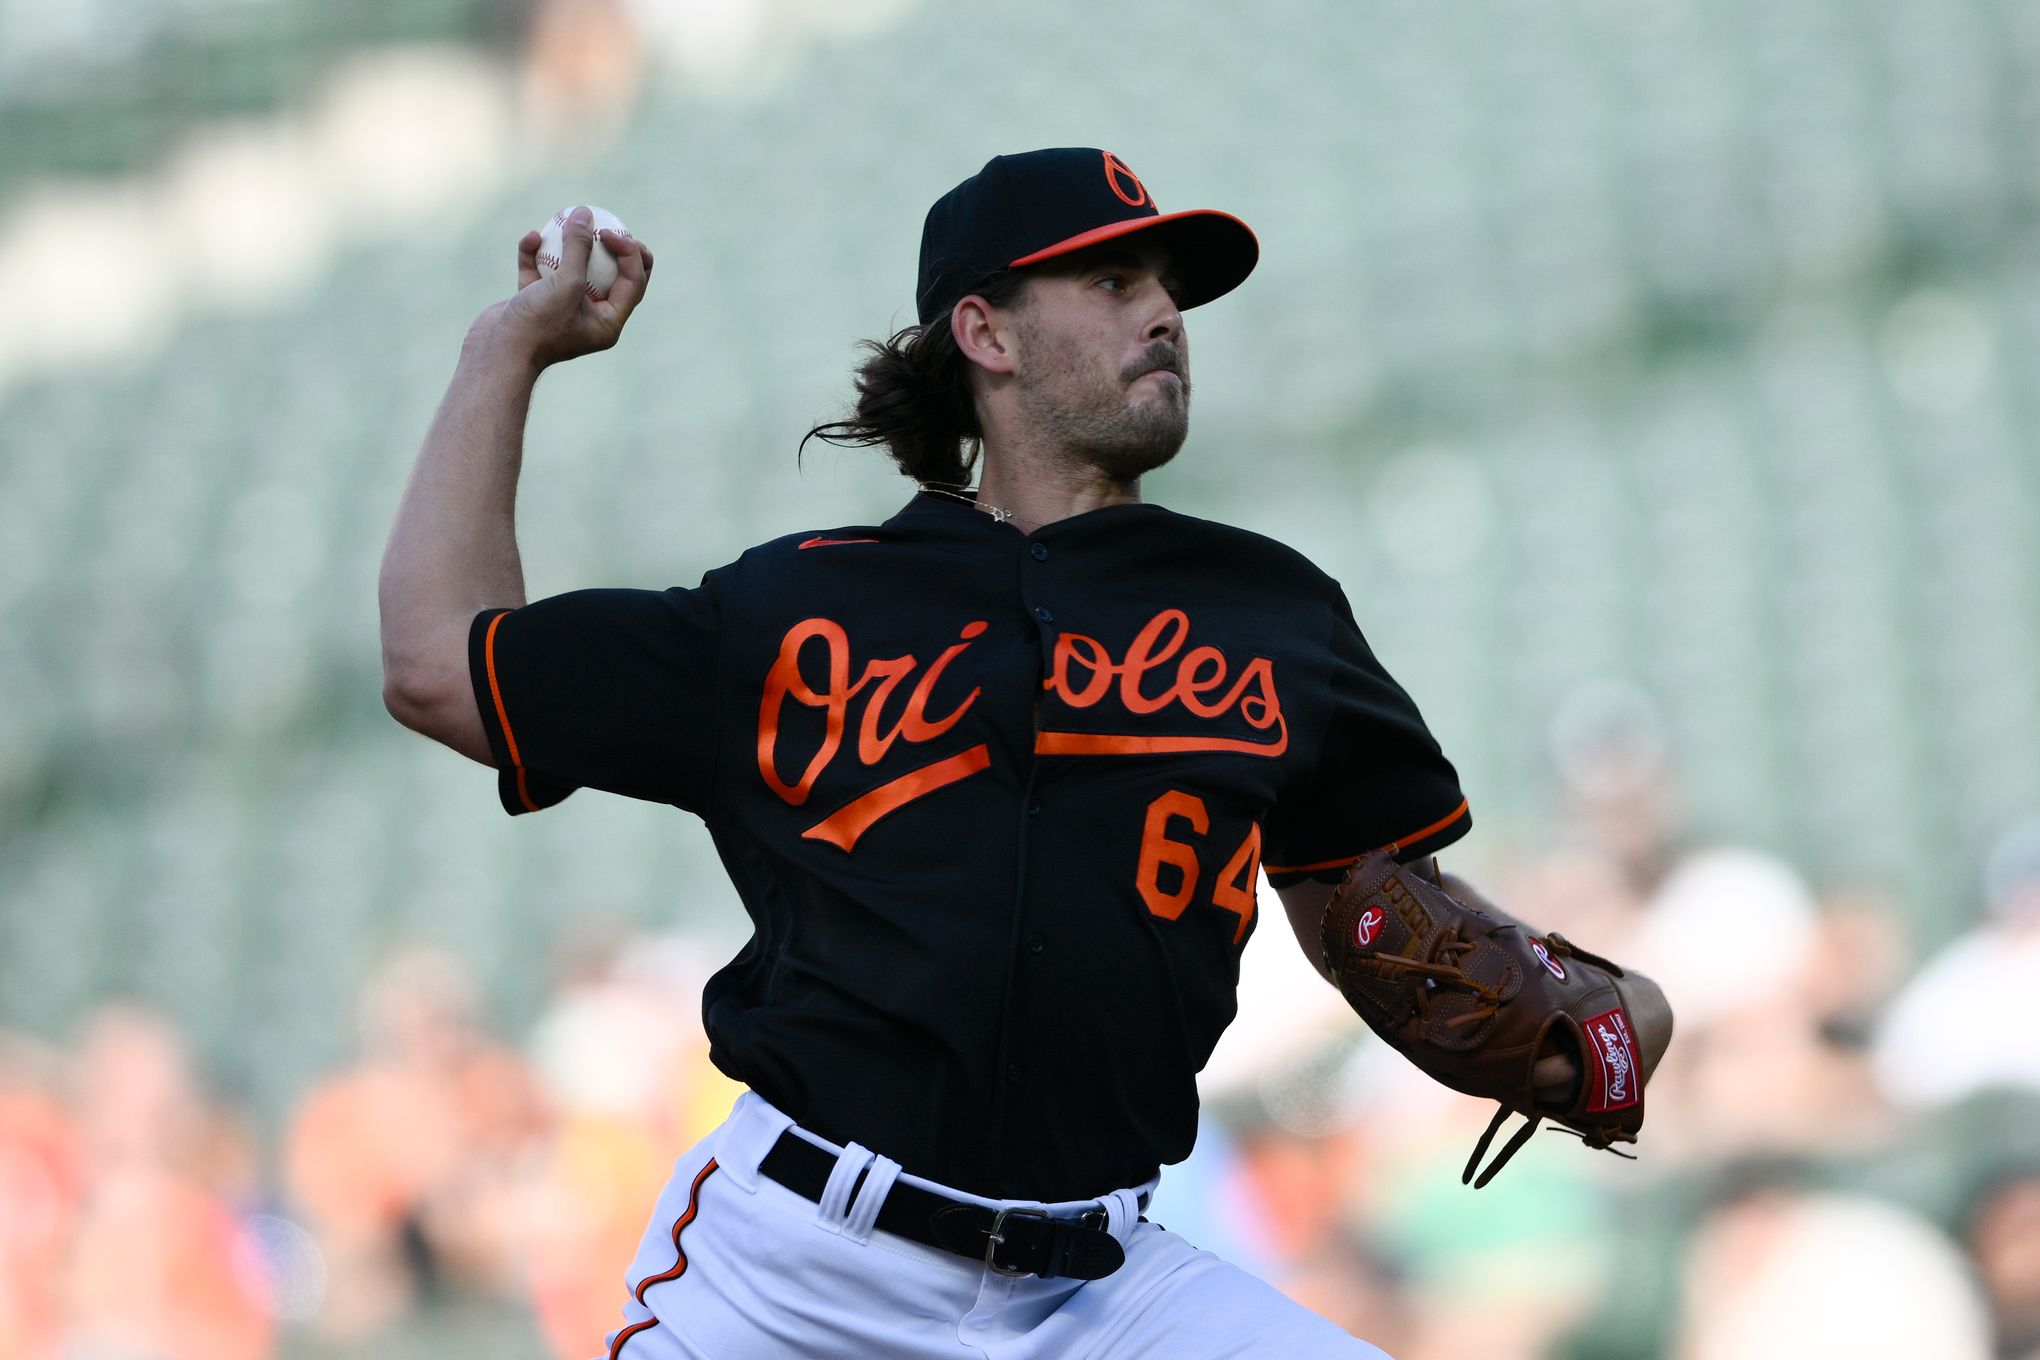 Mountcastle's hit in the 10th gives Orioles a 1-0 win over